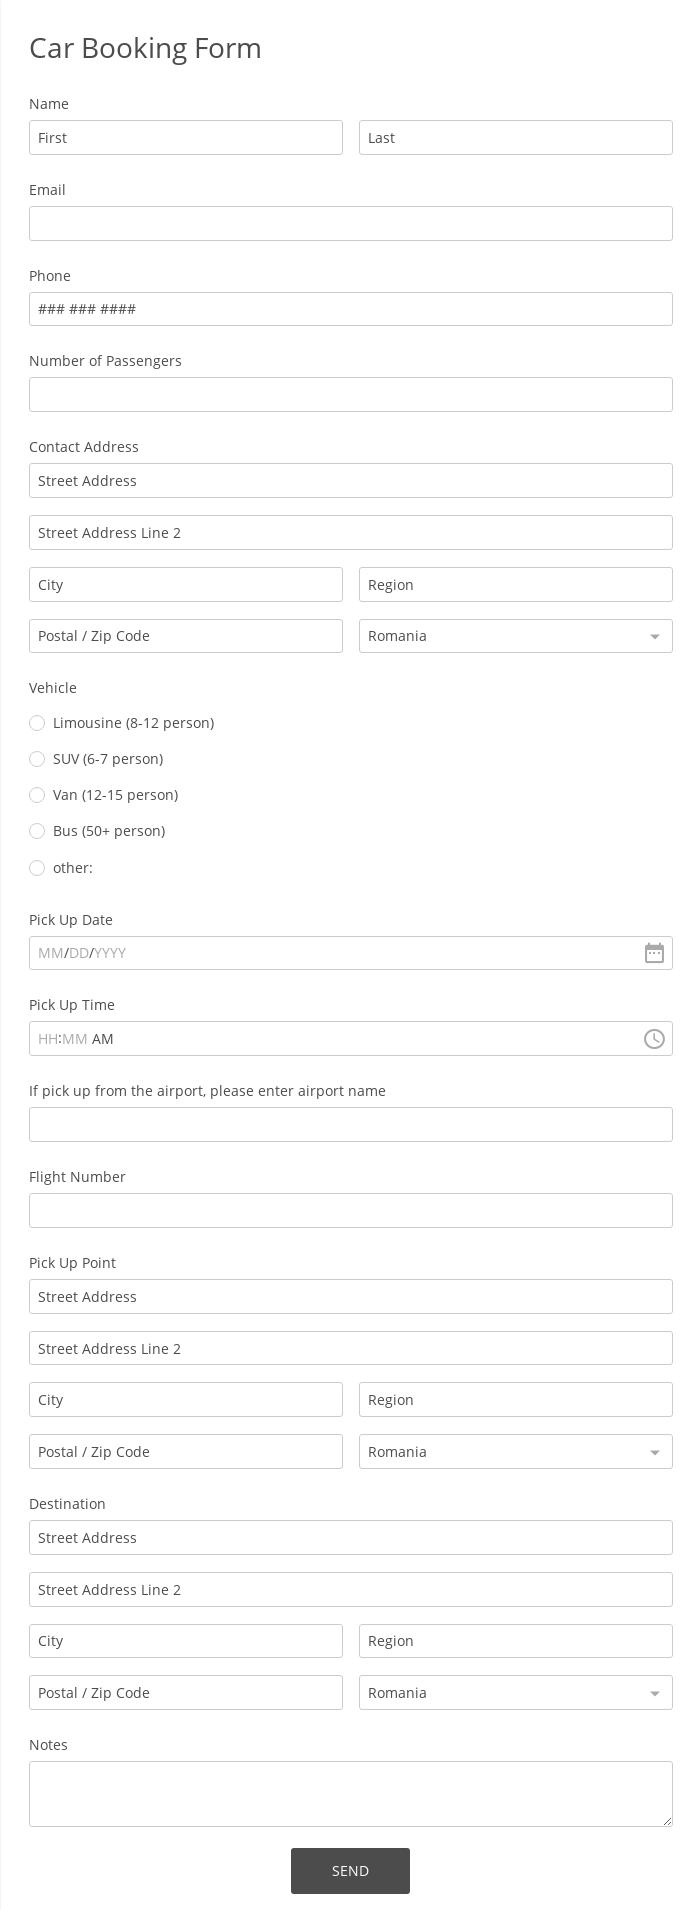 Car Booking Form